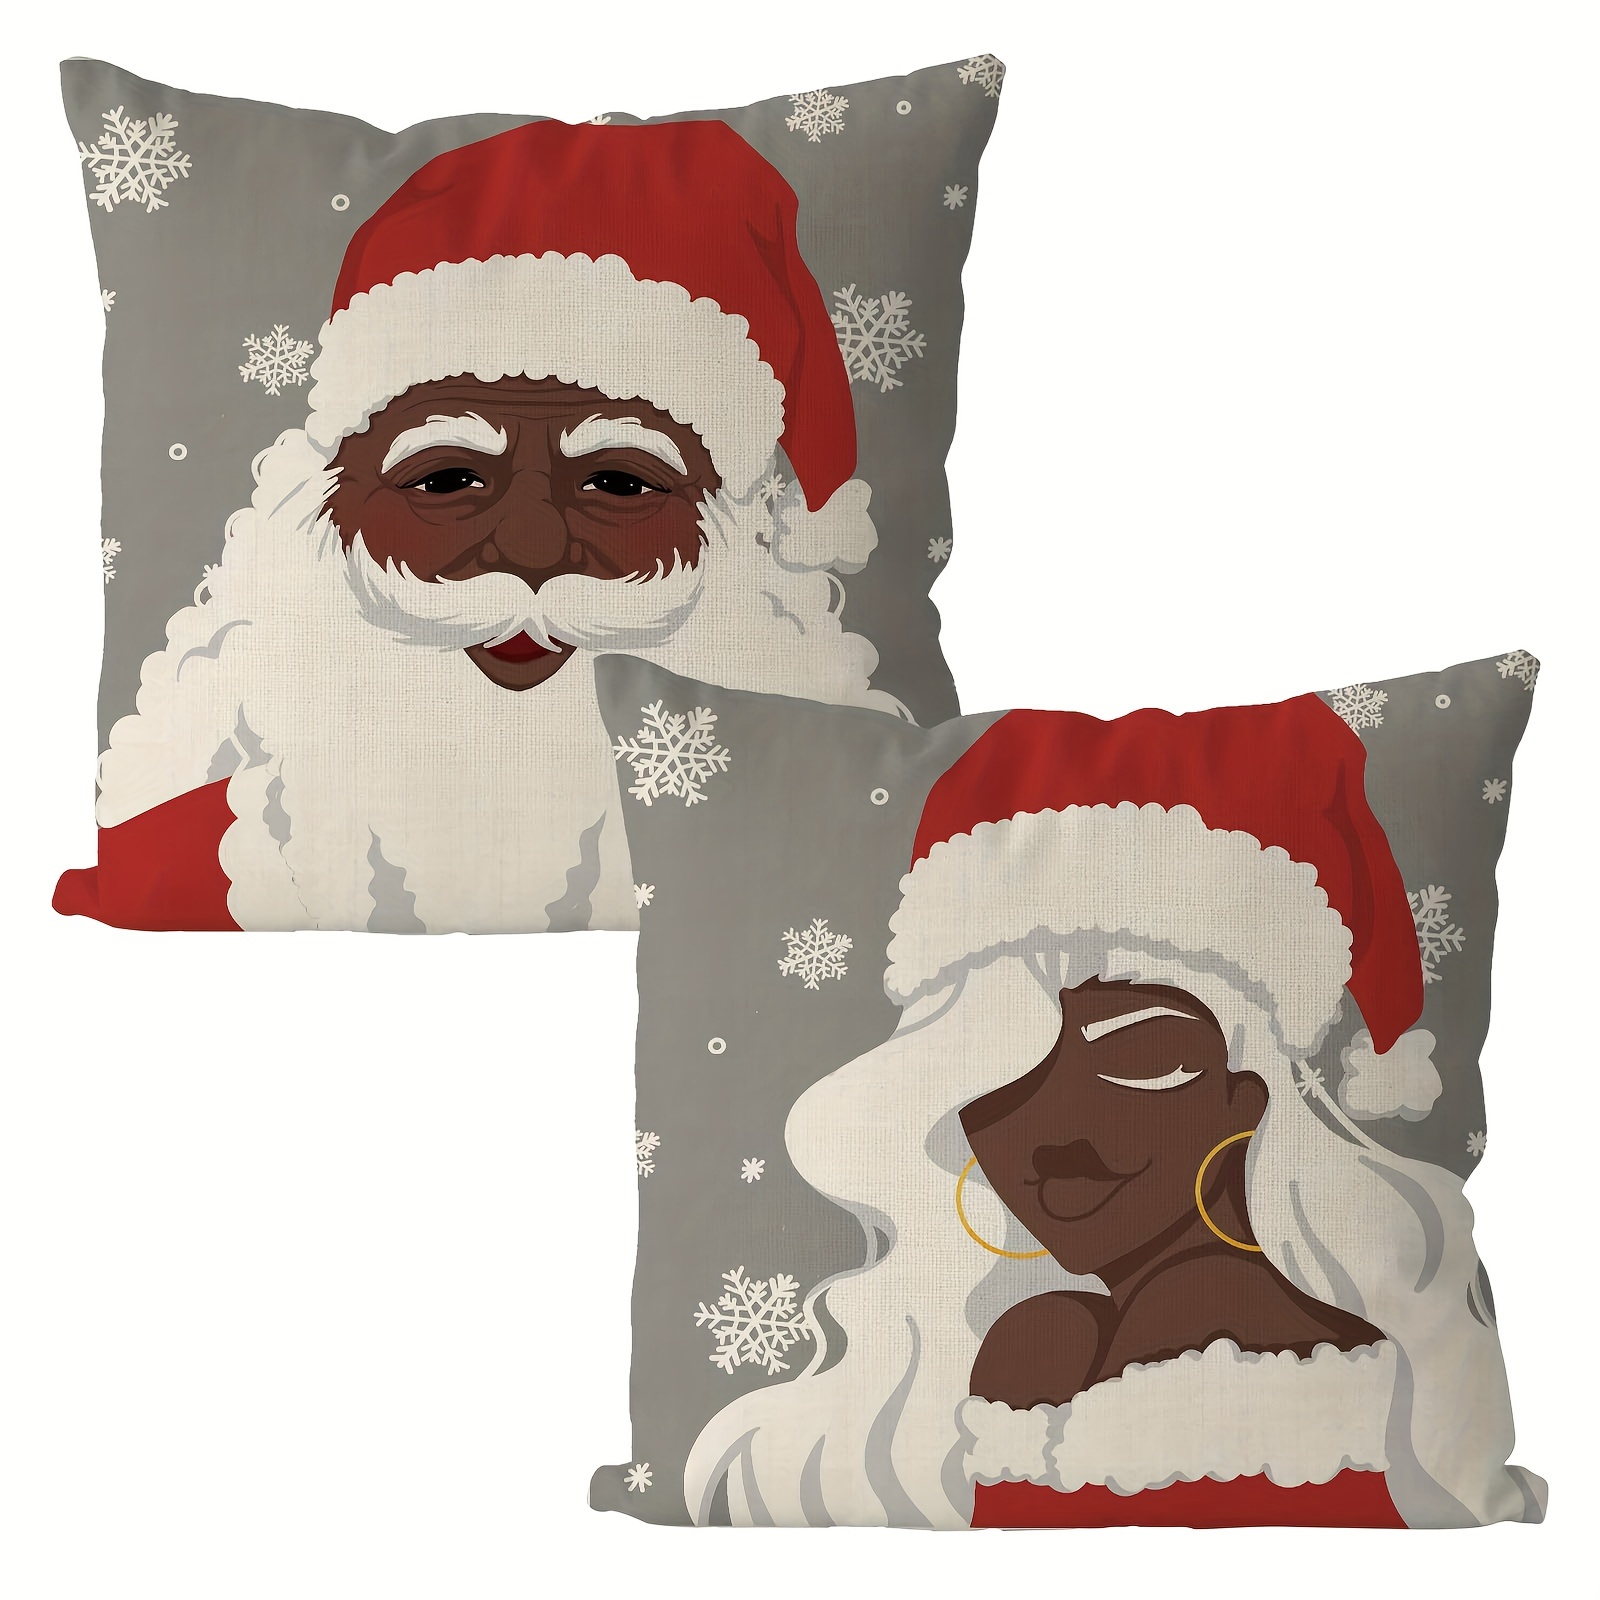 

2pcs Linen Mixed Weave Christmas Santa Claus Christmas Girls Throw Pillow Cover Home Decor, Room Decor, Bedroom Decor, Collectible Buildings Accessories (cushion Is Not Included)